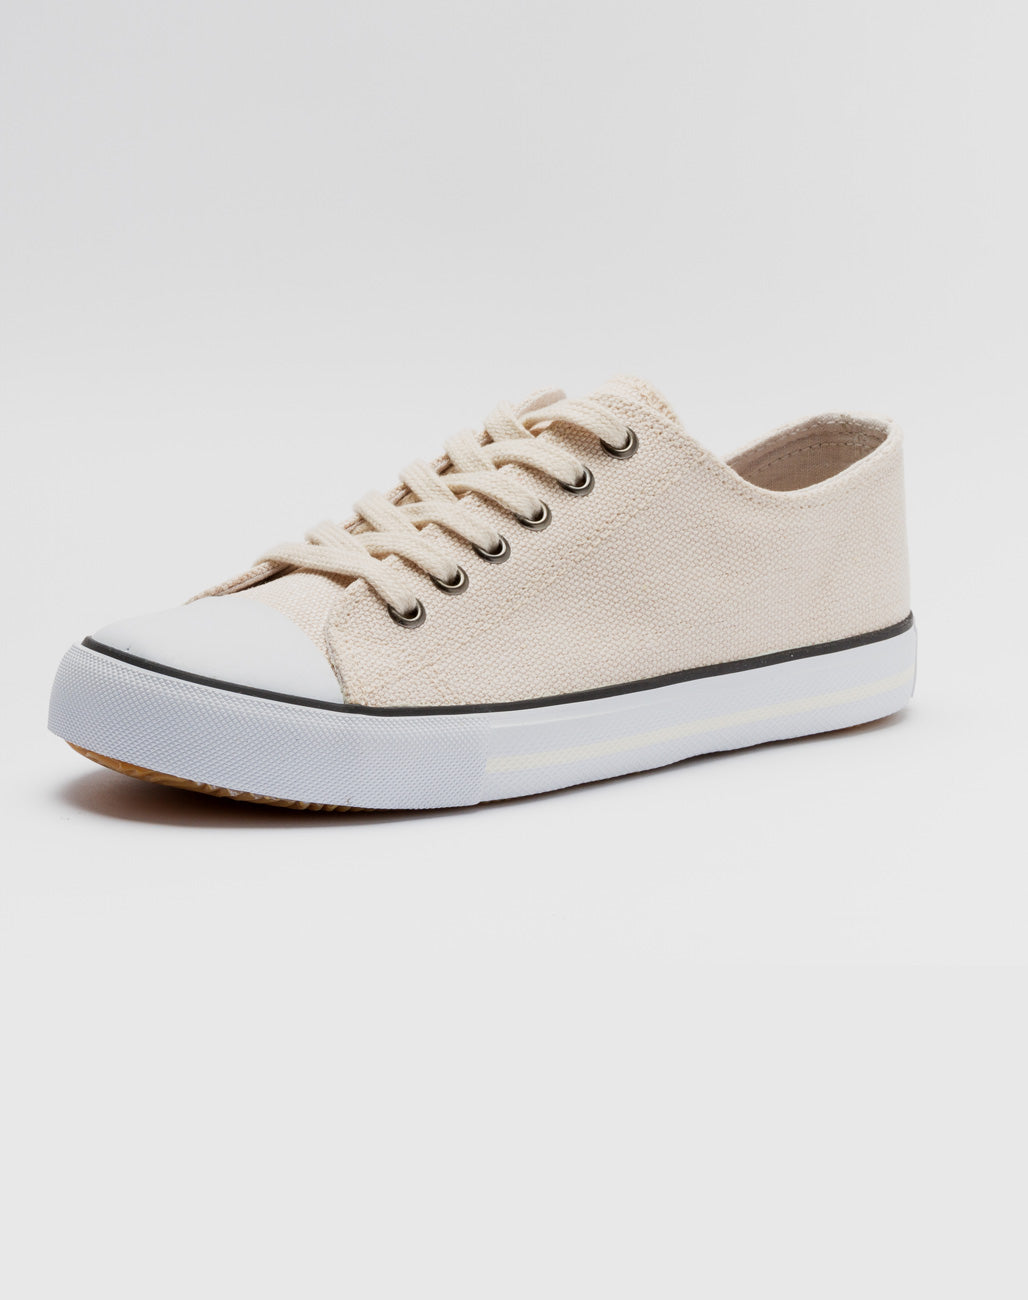 Schuh Charley Offwhite